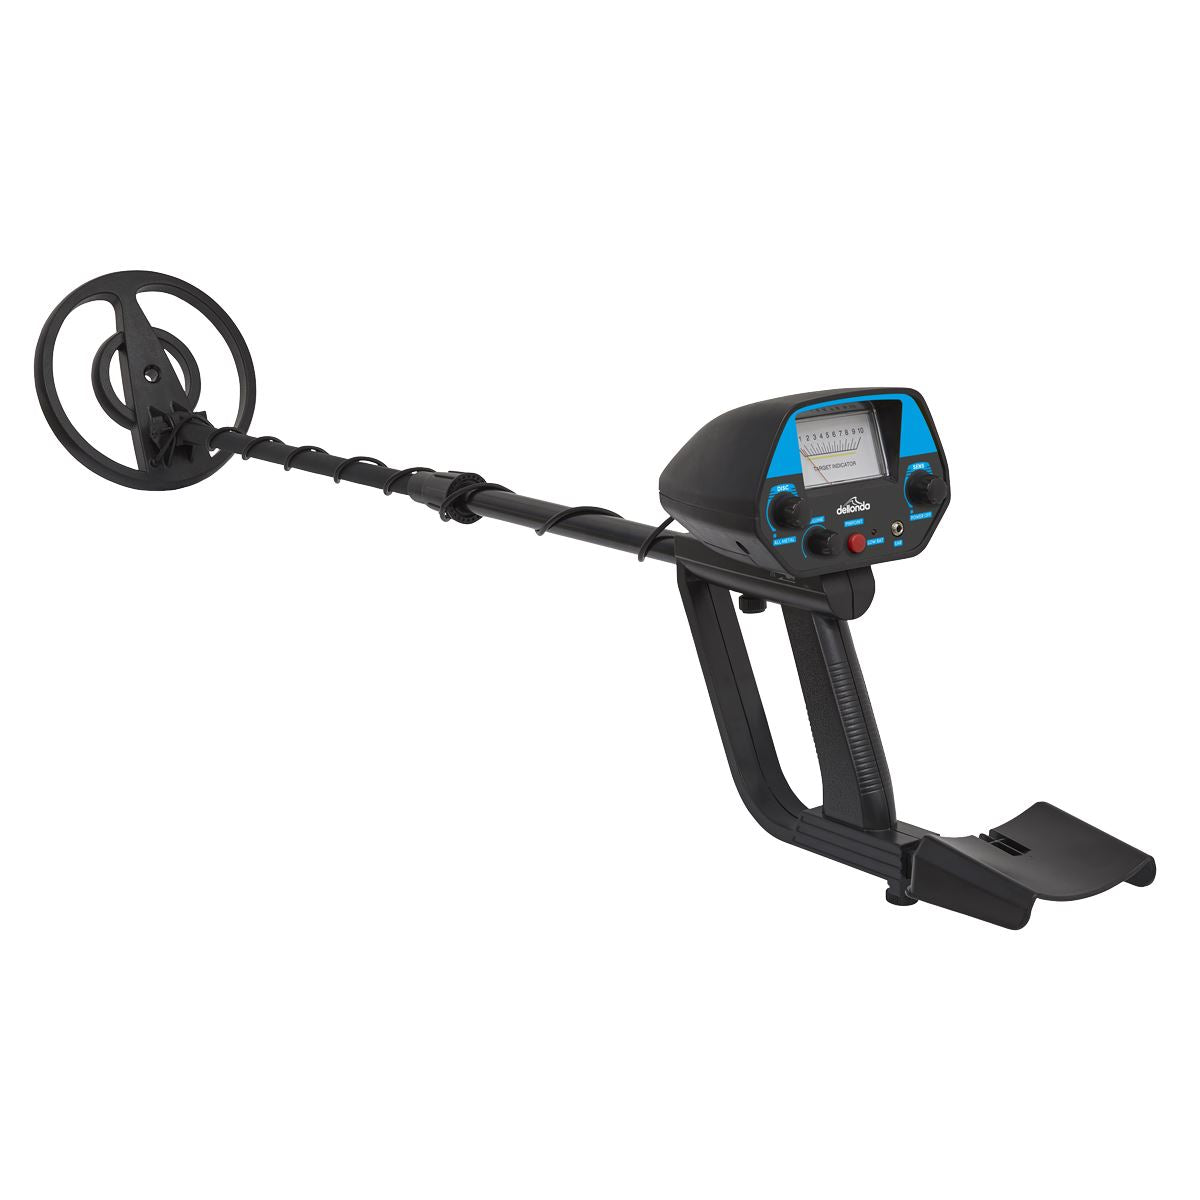 Dellonda Adults Metal Detector with High Accuracy Pinpoint Function